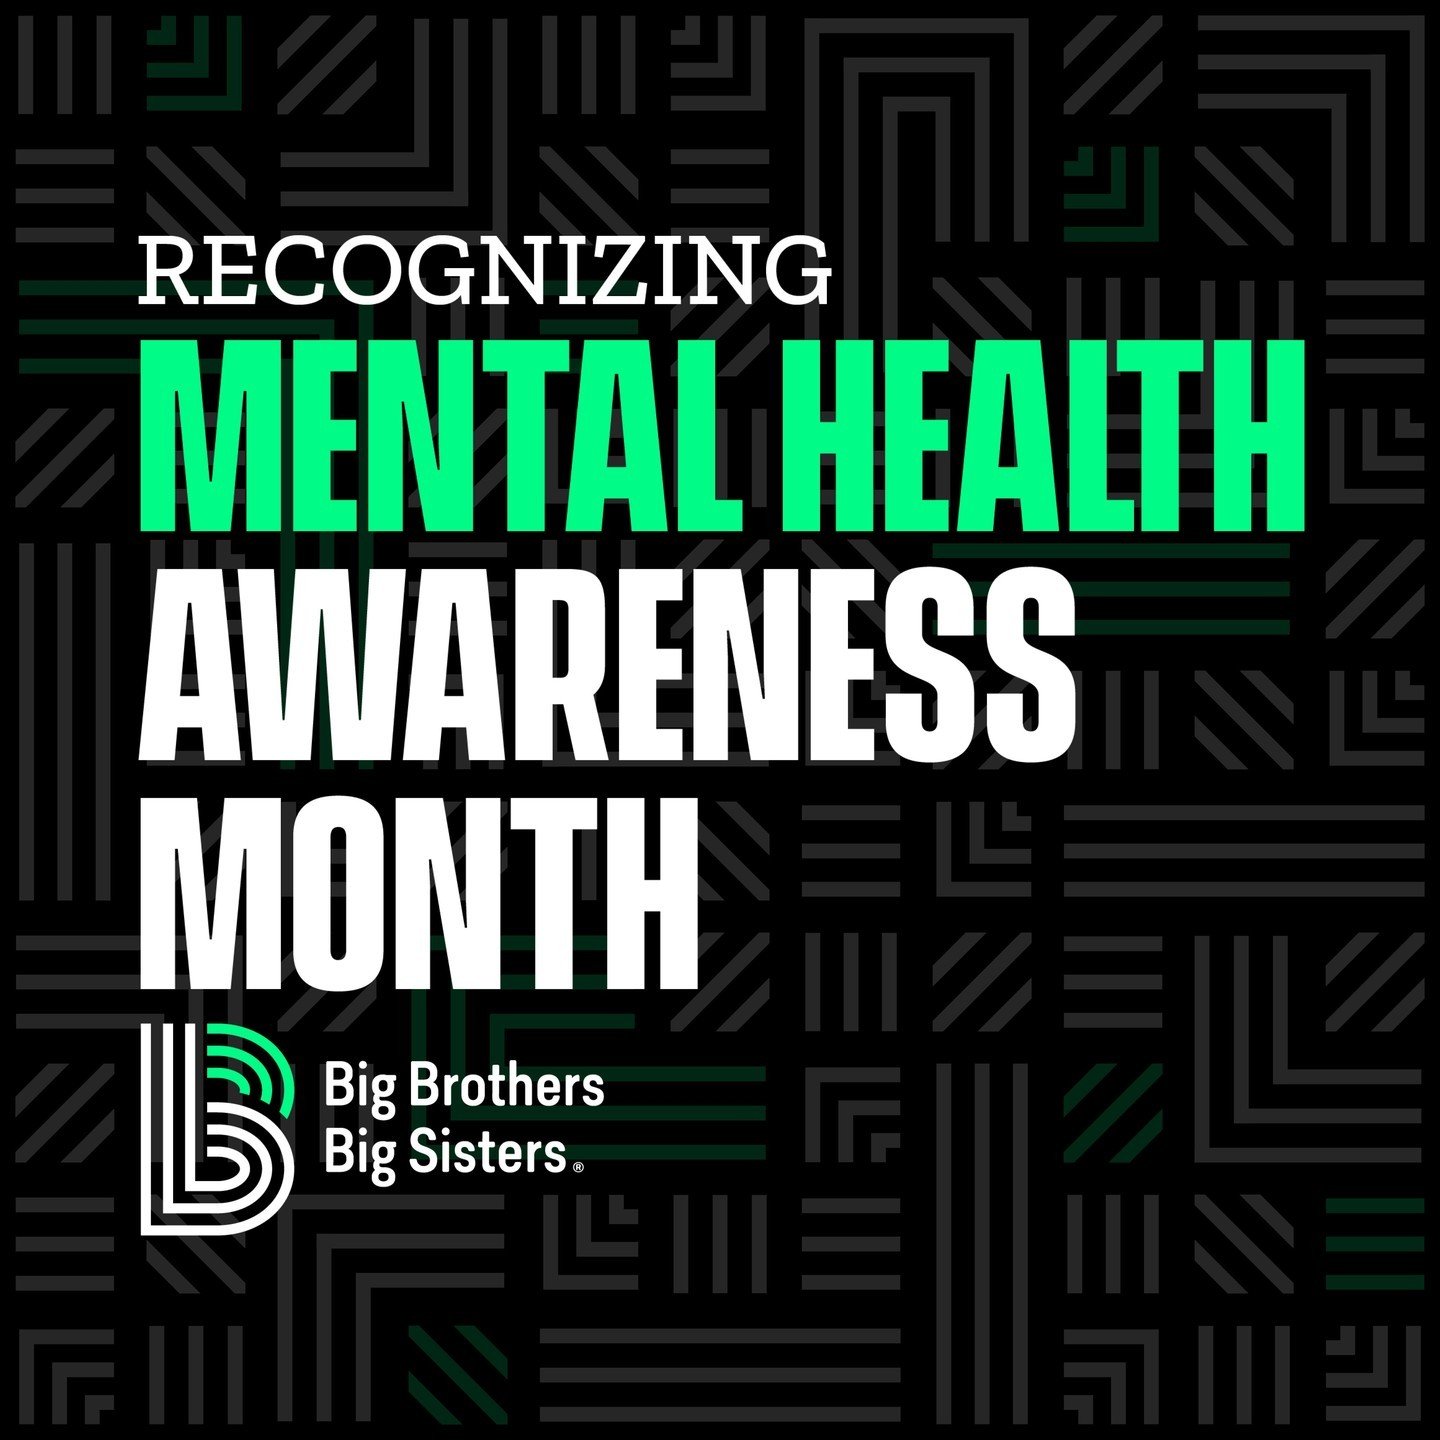 🧠💚 Did you know that 1 in 6 young people, ages 6-17, experience a mental health disorder annually? It's time to raise awareness and take action this #MentalHealthAwarenessMonth!

Research shows that having a mentor can make a significant difference